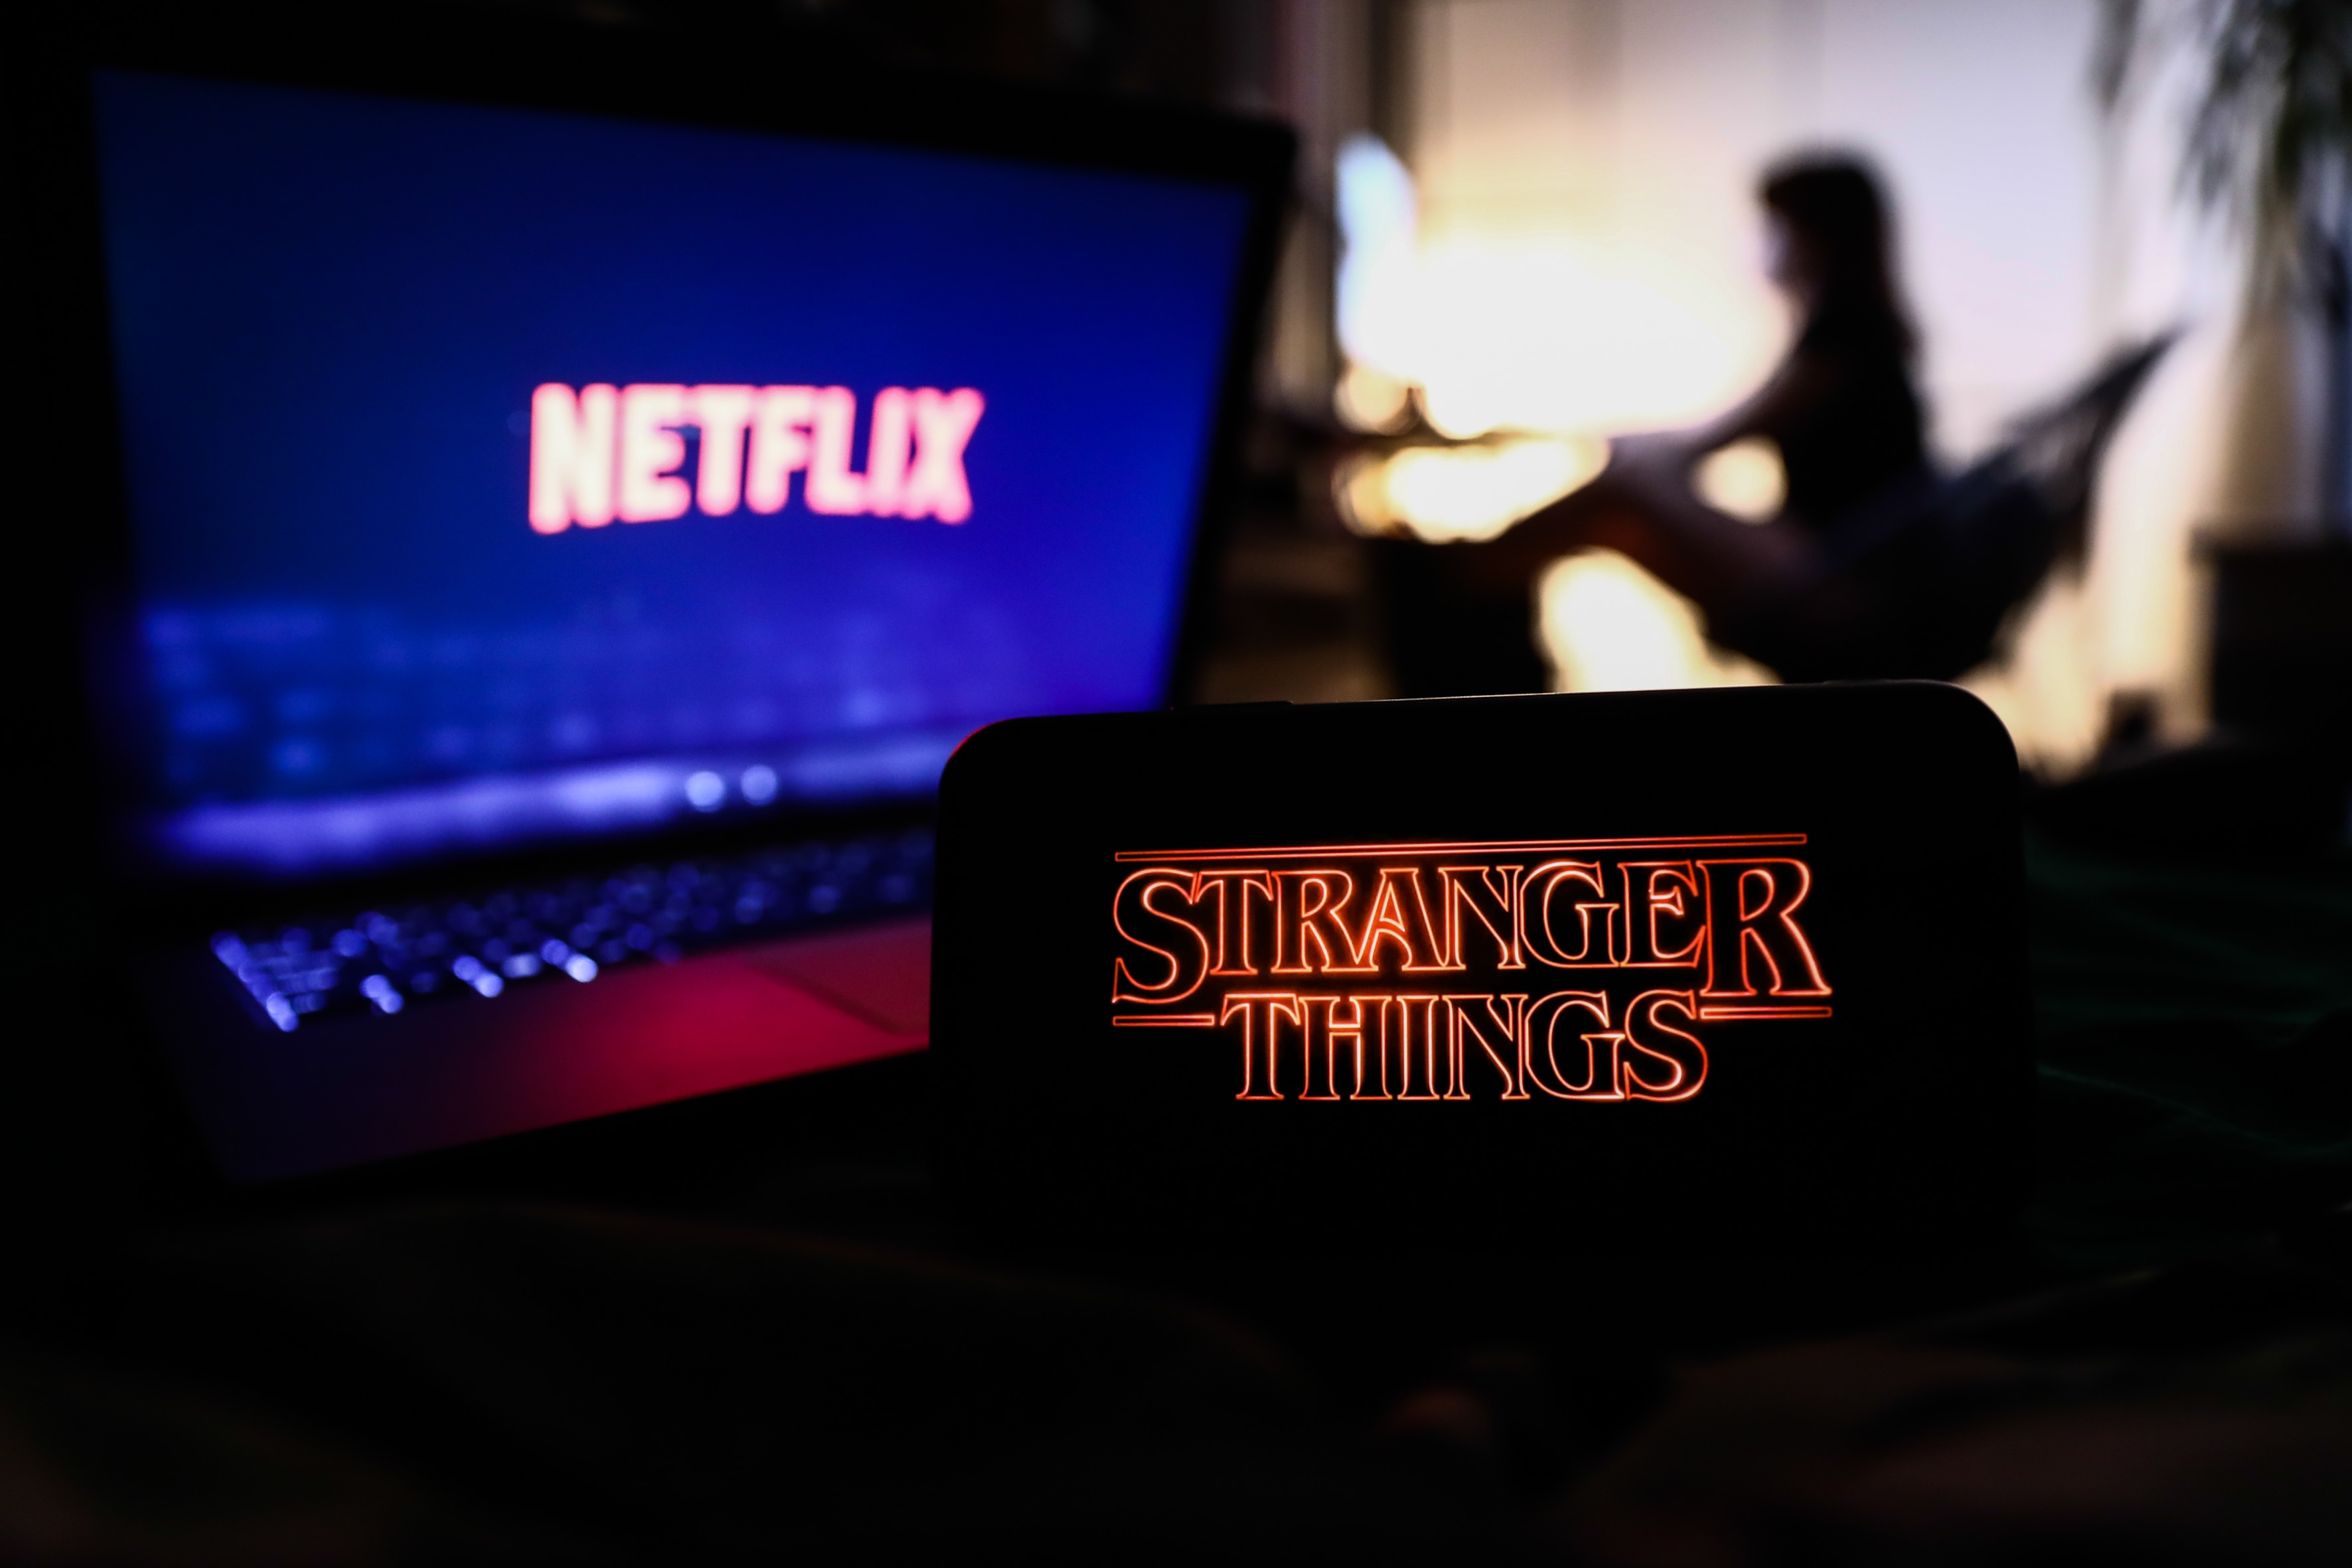 Netflix share price: The fourth season of Stranger Things was one of Netflix's most popular shows in 2022.